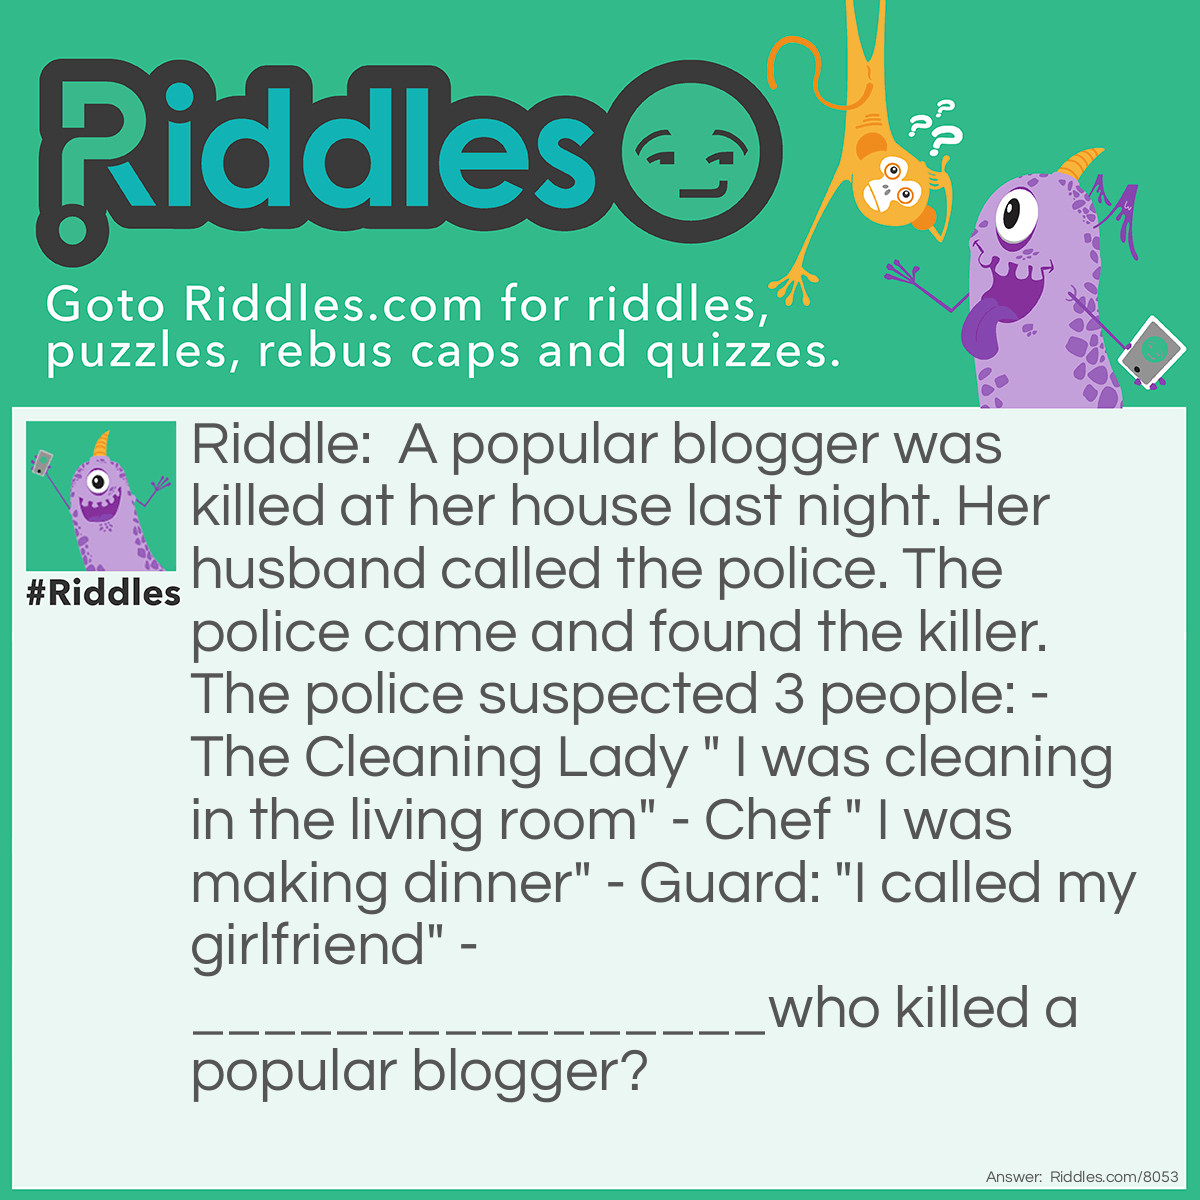 Riddle: A popular blogger was killed at her house last night. Her husband called the police. The police came and found the killer. The police suspected 3 people: - The Cleaning Lady " I was cleaning in the living room" - Chef " I was making dinner" - Guard: "I called my girlfriend" -________________who killed a popular blogger? Answer: Answer: Chef How could it be dinner it was night